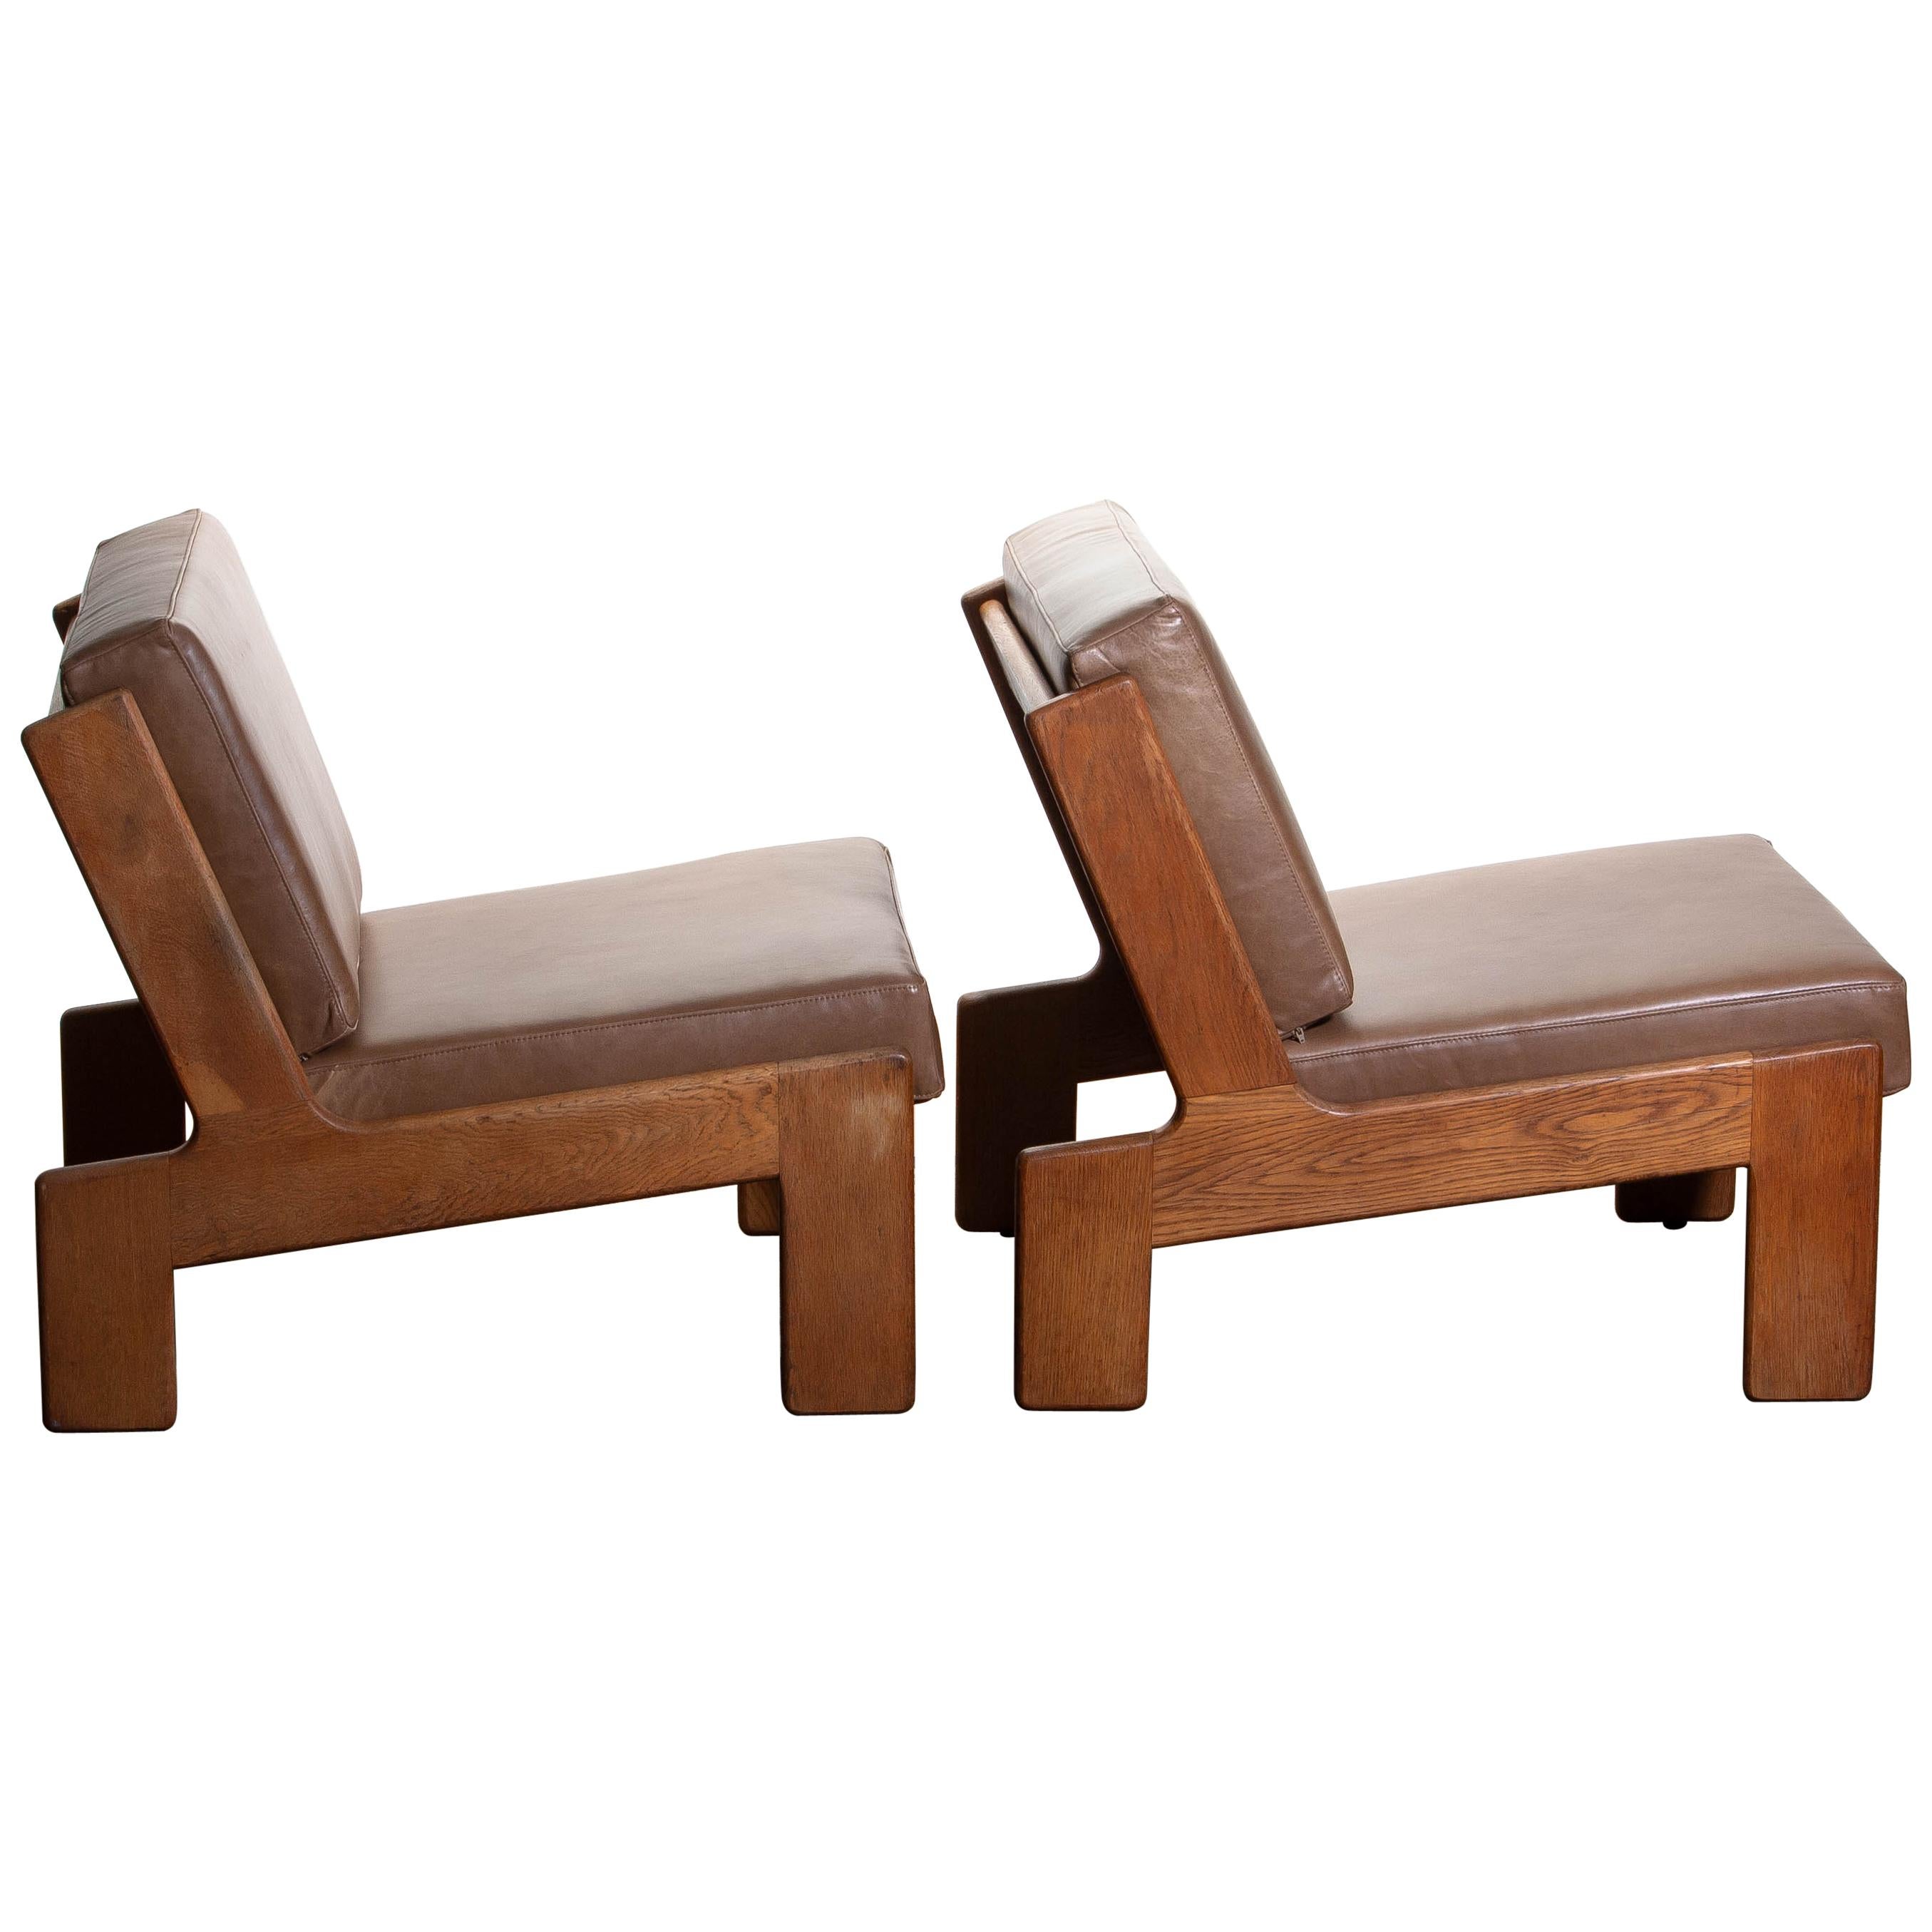 Finnish 1960s, Pair of Oak and Leather Cubist Lounge Chairs by Esko Pajamies for Asko